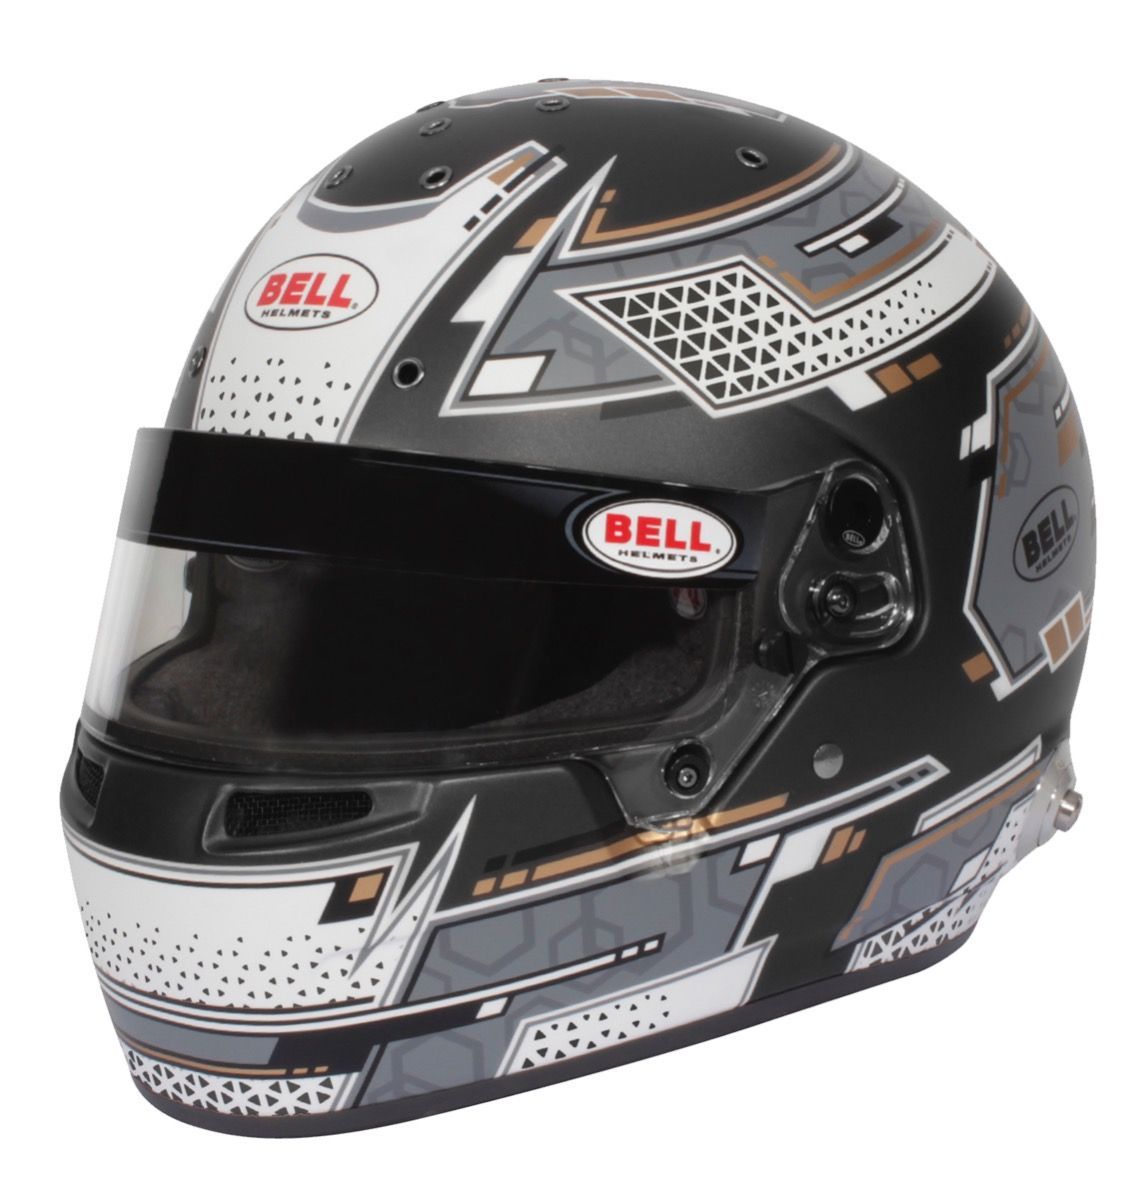 Bell Helmets - Bell® - PRO LINE - RS7 DRIVEN | Performance Products